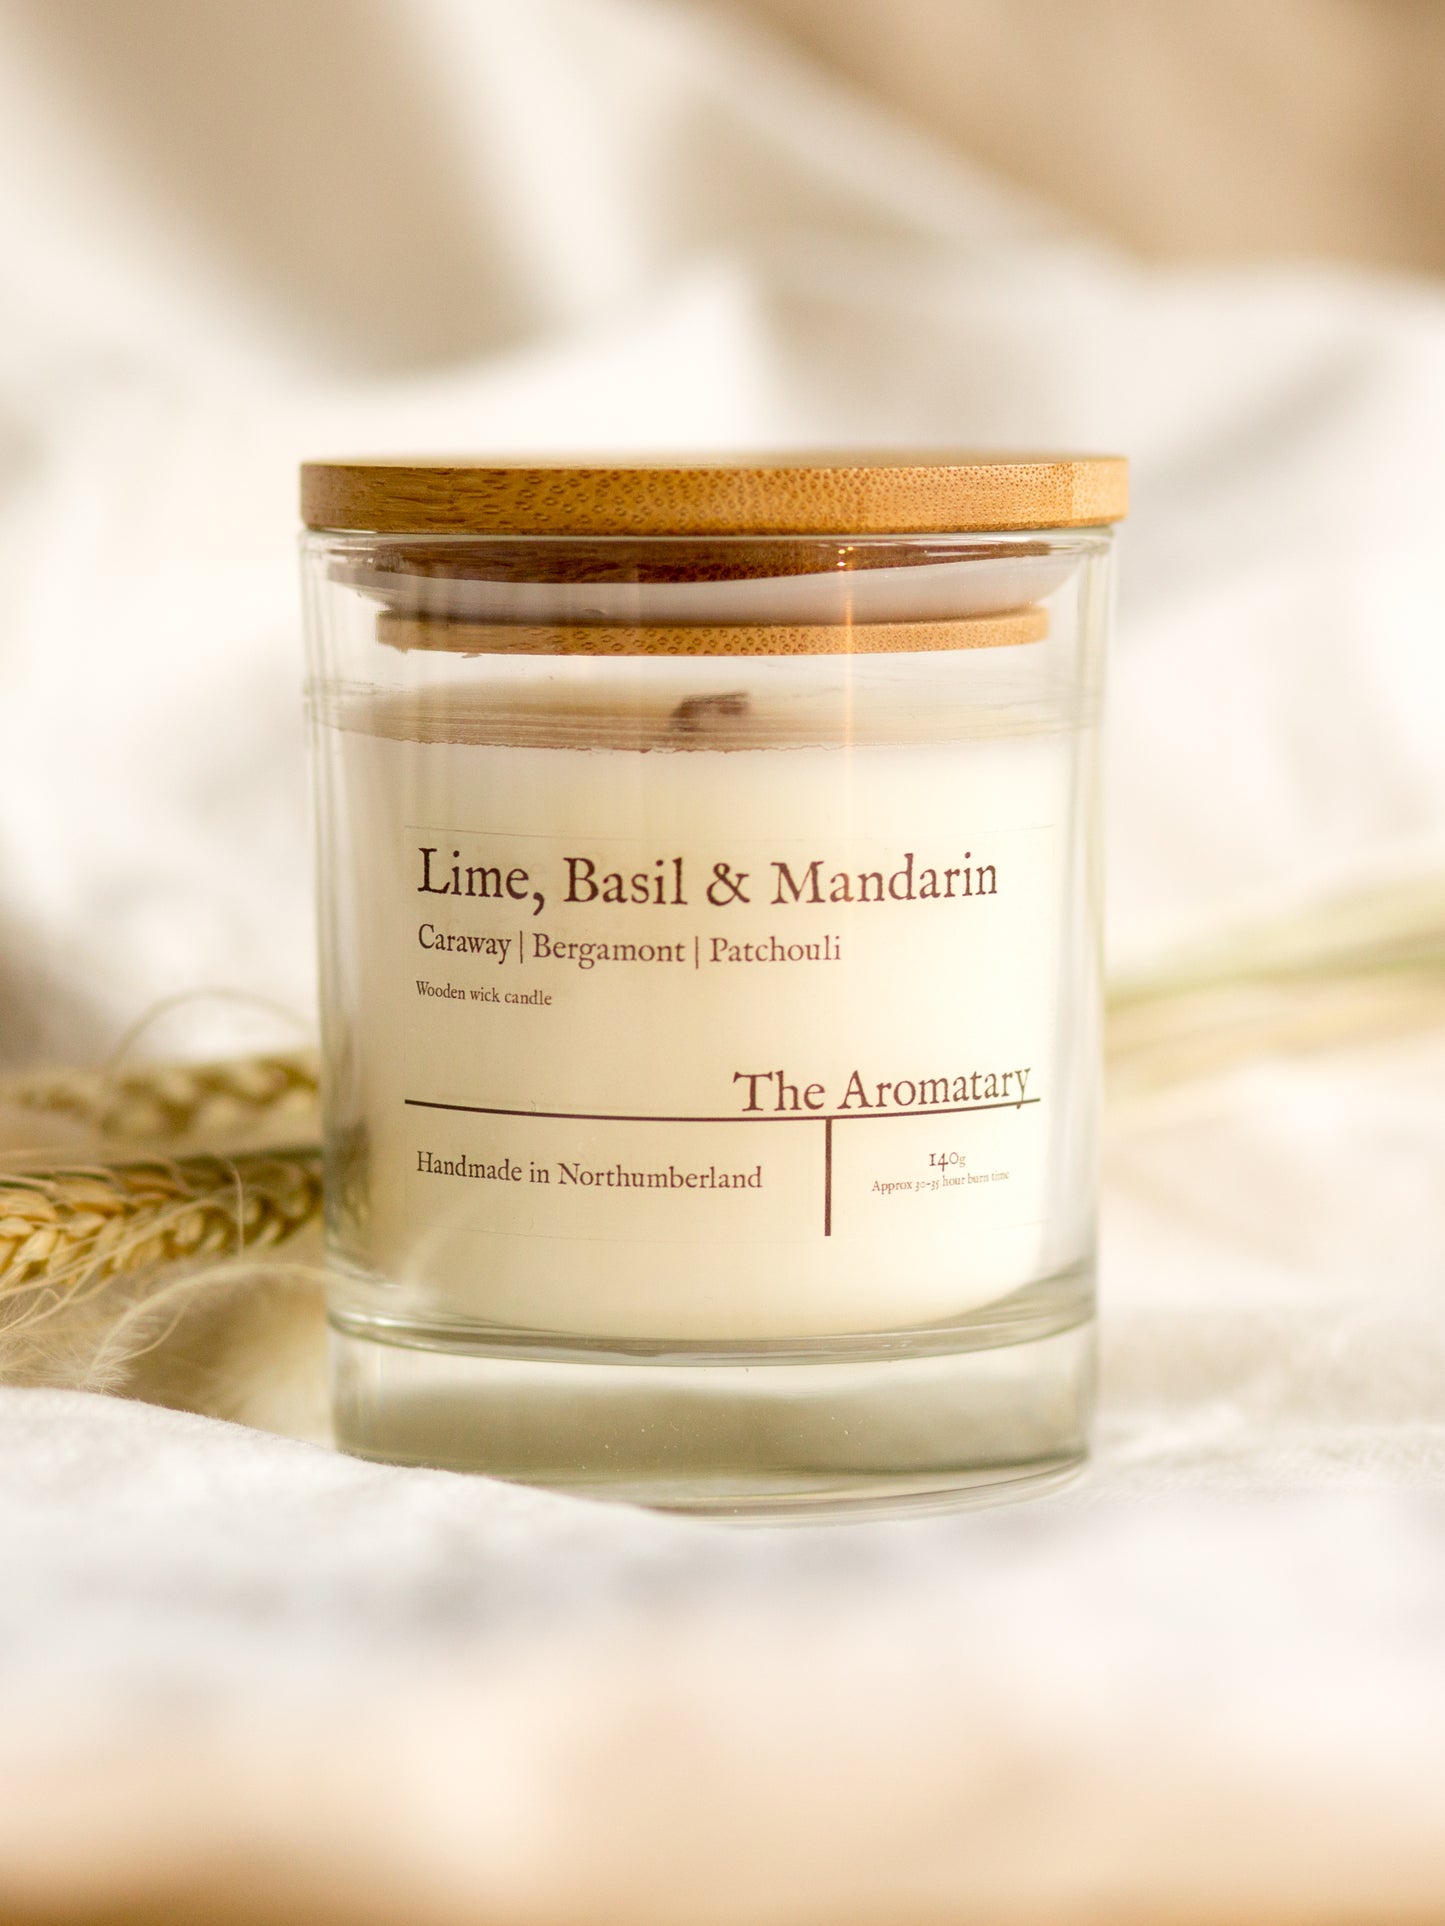 Lime, Basil & Mandarin classic wooden wick candle